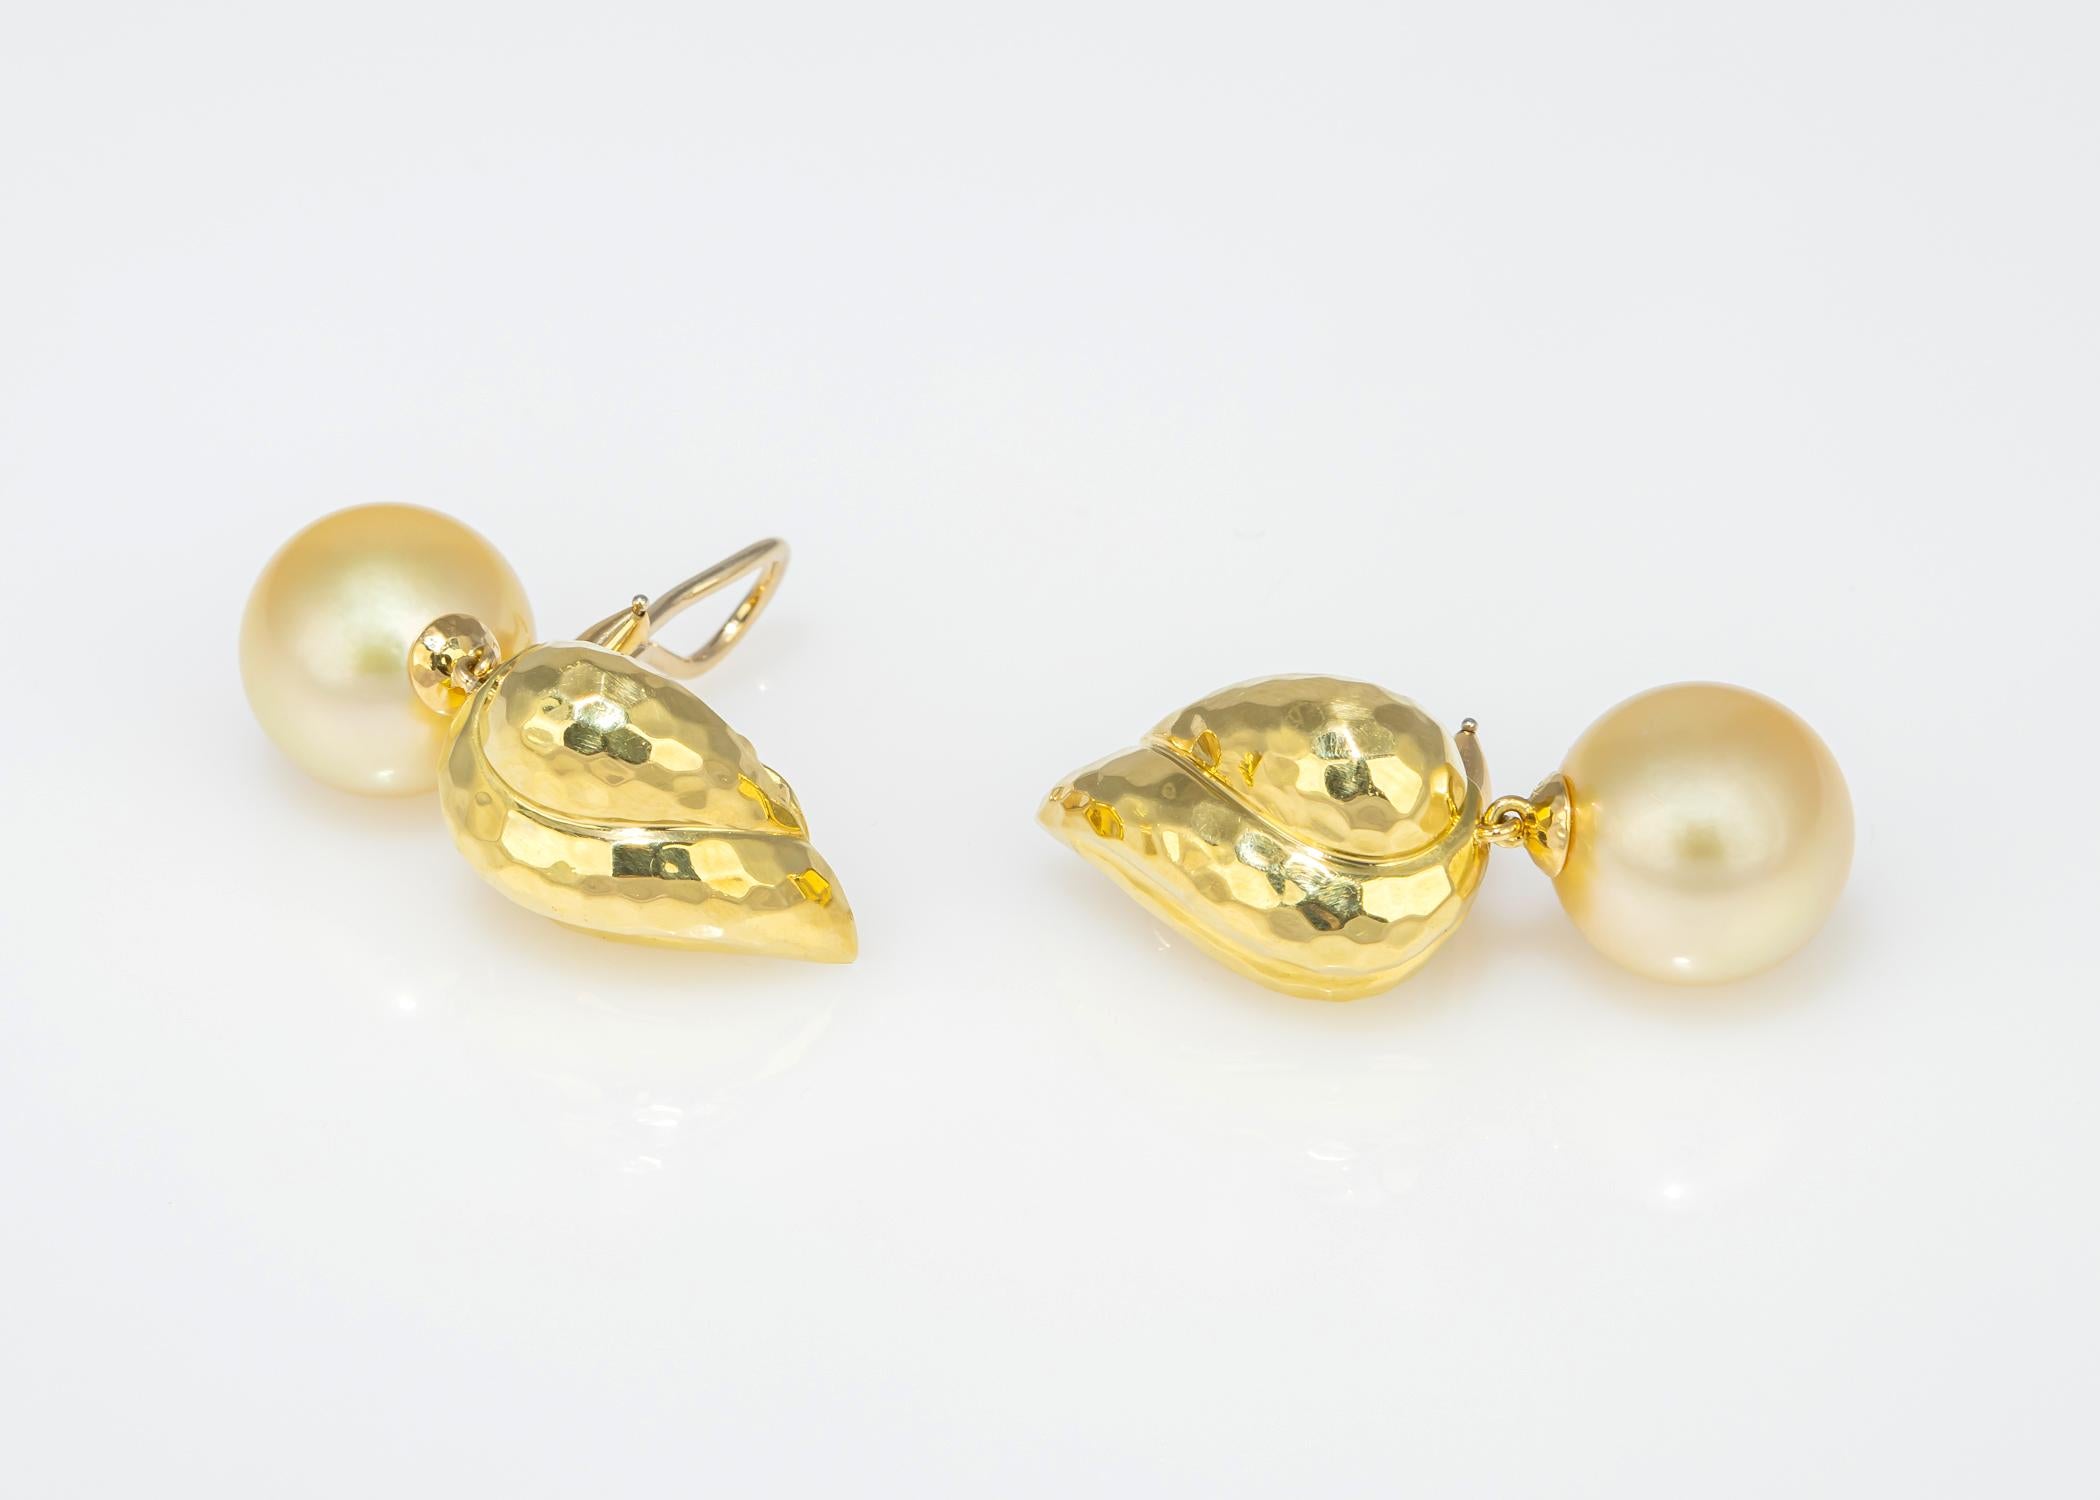 Henry Dunay is one of the greatest American jewelers of our time. This pair of earrings, just over 1 1/2 inches in length is from his faceted collection and features 14.4mm golden South Sea pearls. Chic and wearable. An alternative to an ordinary